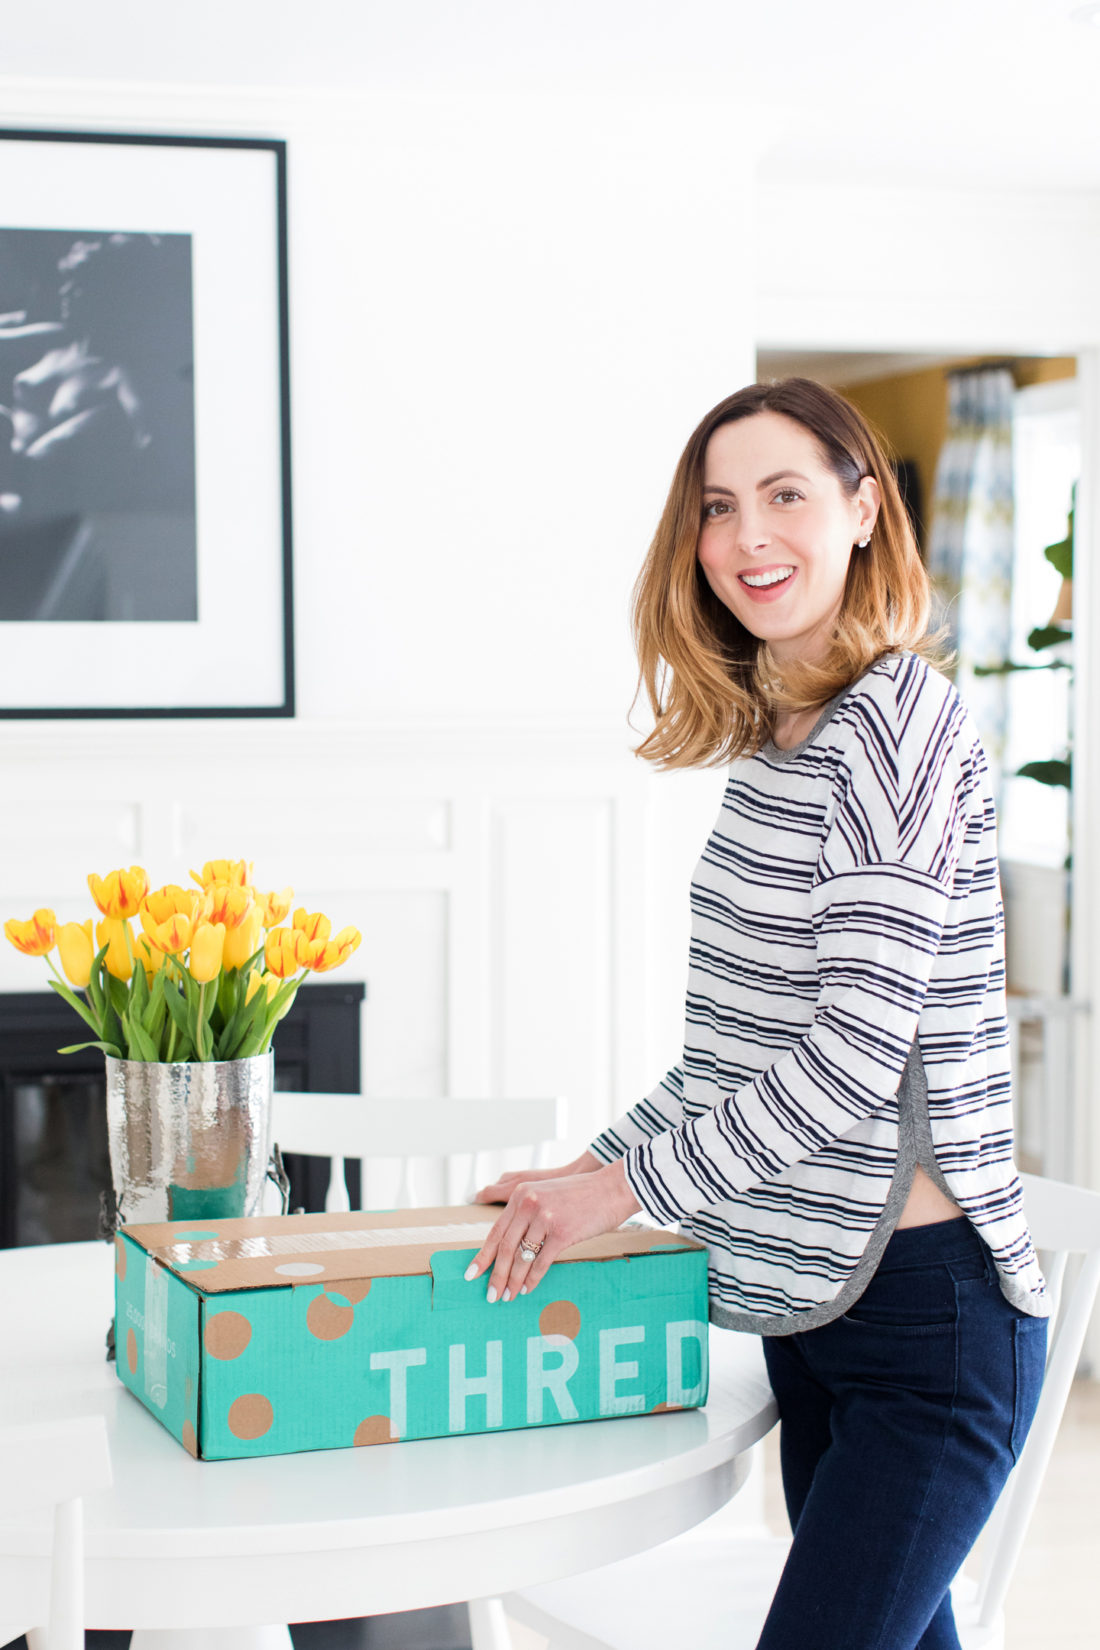 EVa Amurri Martino prepares to open her cardboard box of secondhand clothes from ThredUP